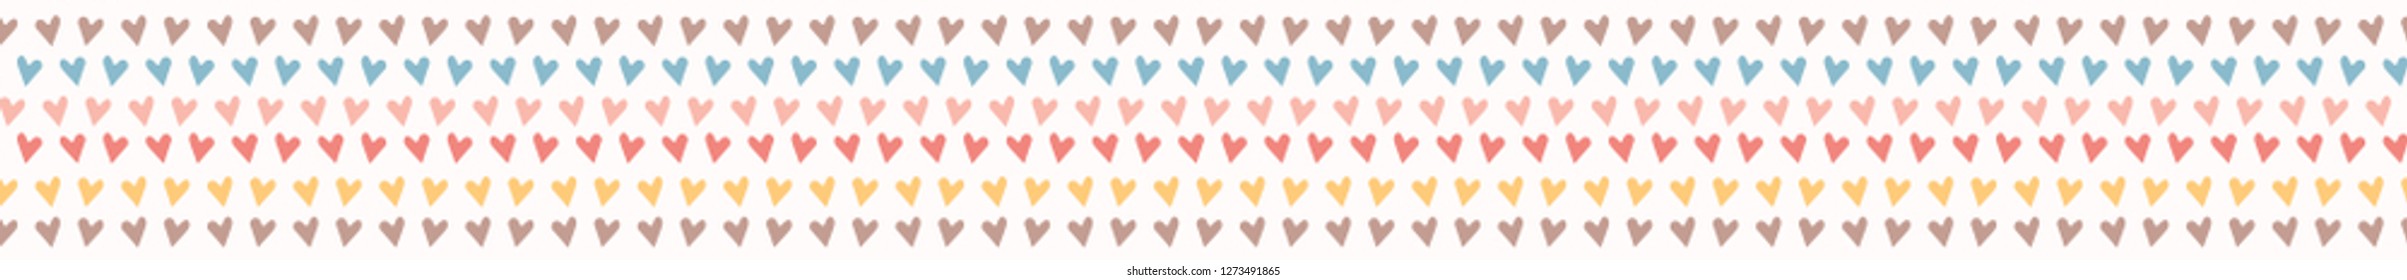 Cute cartoon love heart stripes. Hand drawn seamless vector border. Illustration for valentines day, new baby nursery, wedding, lovers day holidays. Pastel flat color banner.
